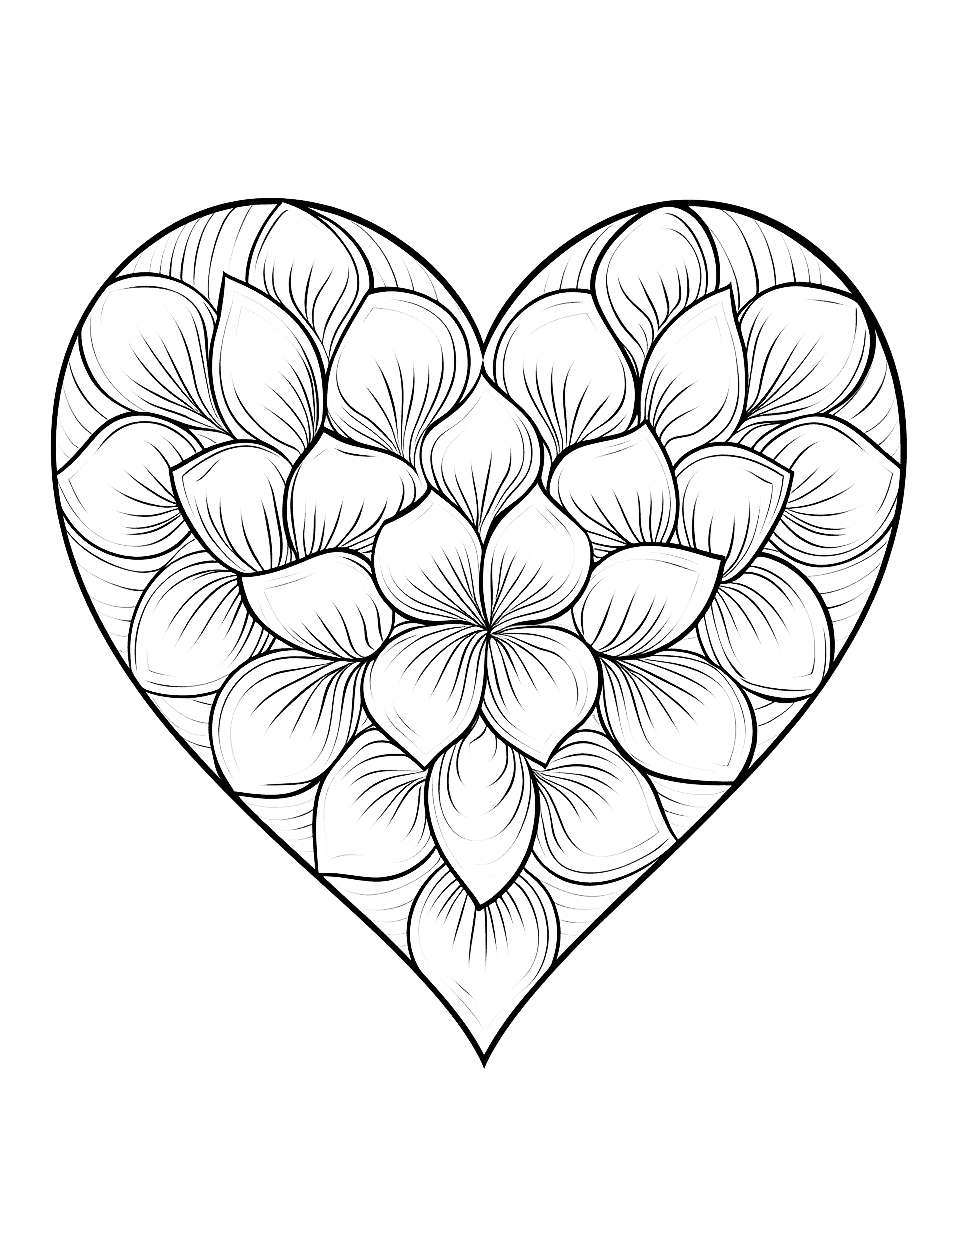 Flower Petal Heart Coloring Page - A heart made out of flower petals.